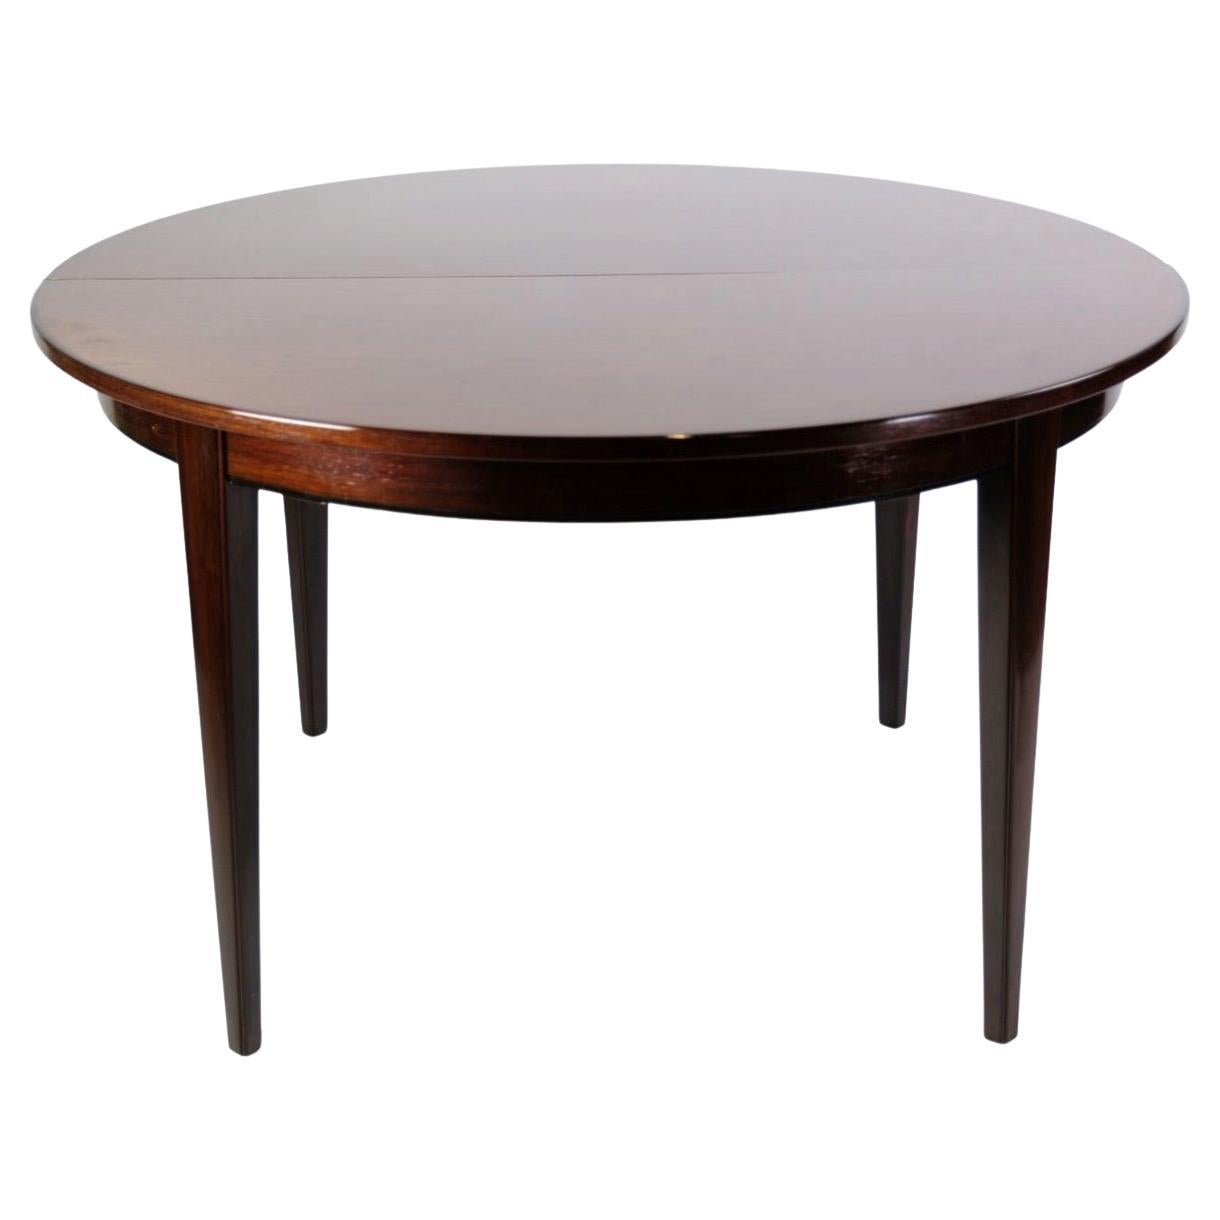 Dining Table Model No. 55 Made In Rosewood Designed By Omann Jun A/S From 1960s For Sale